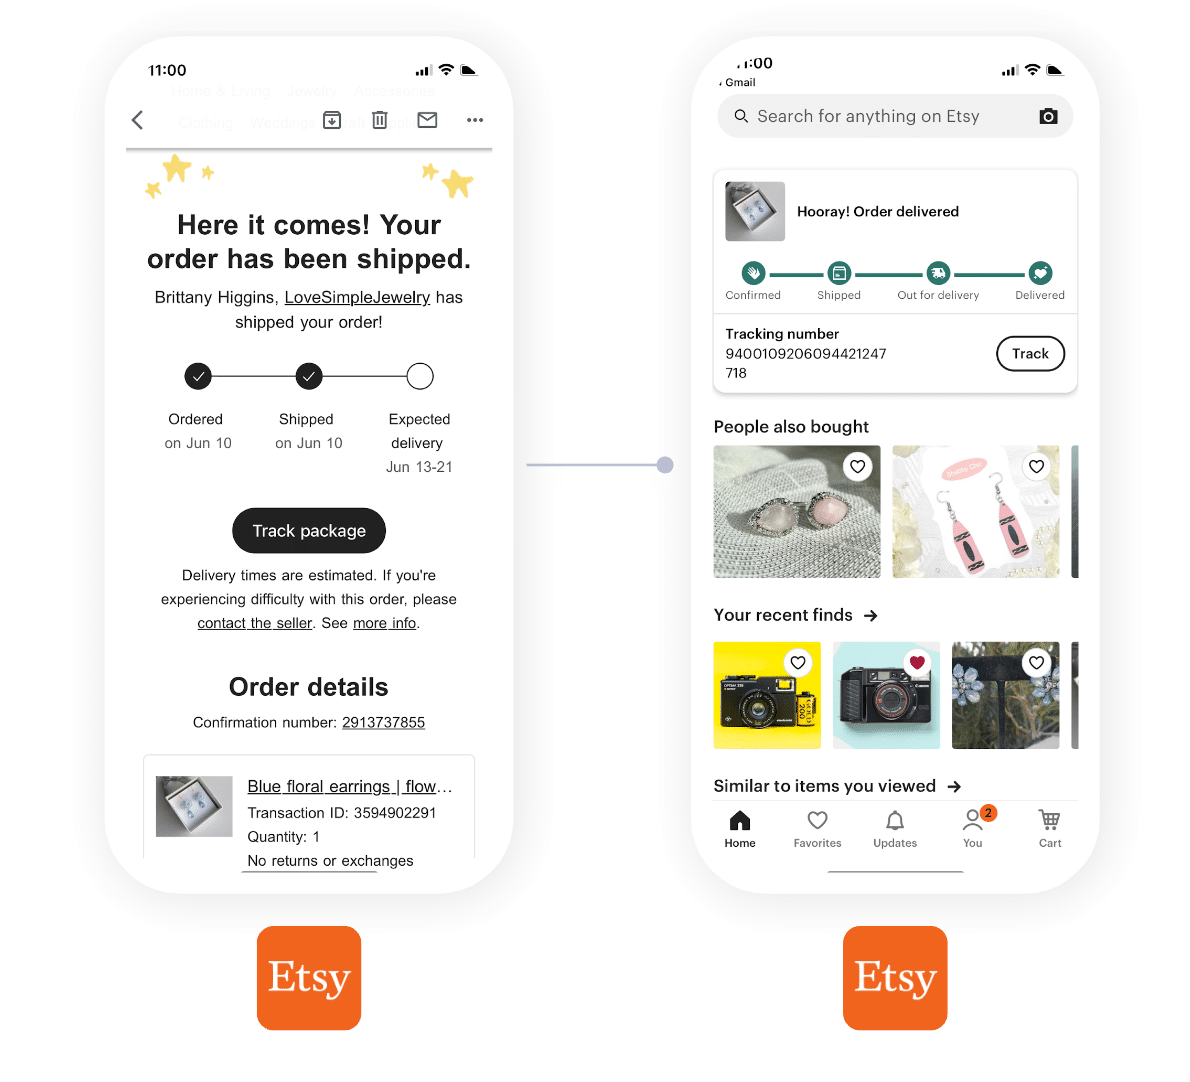 Screenshots of the Etsy app showcasing the email-to-app user flow when receiving an order confirmation email. The user is prompted to track the package in the app. 